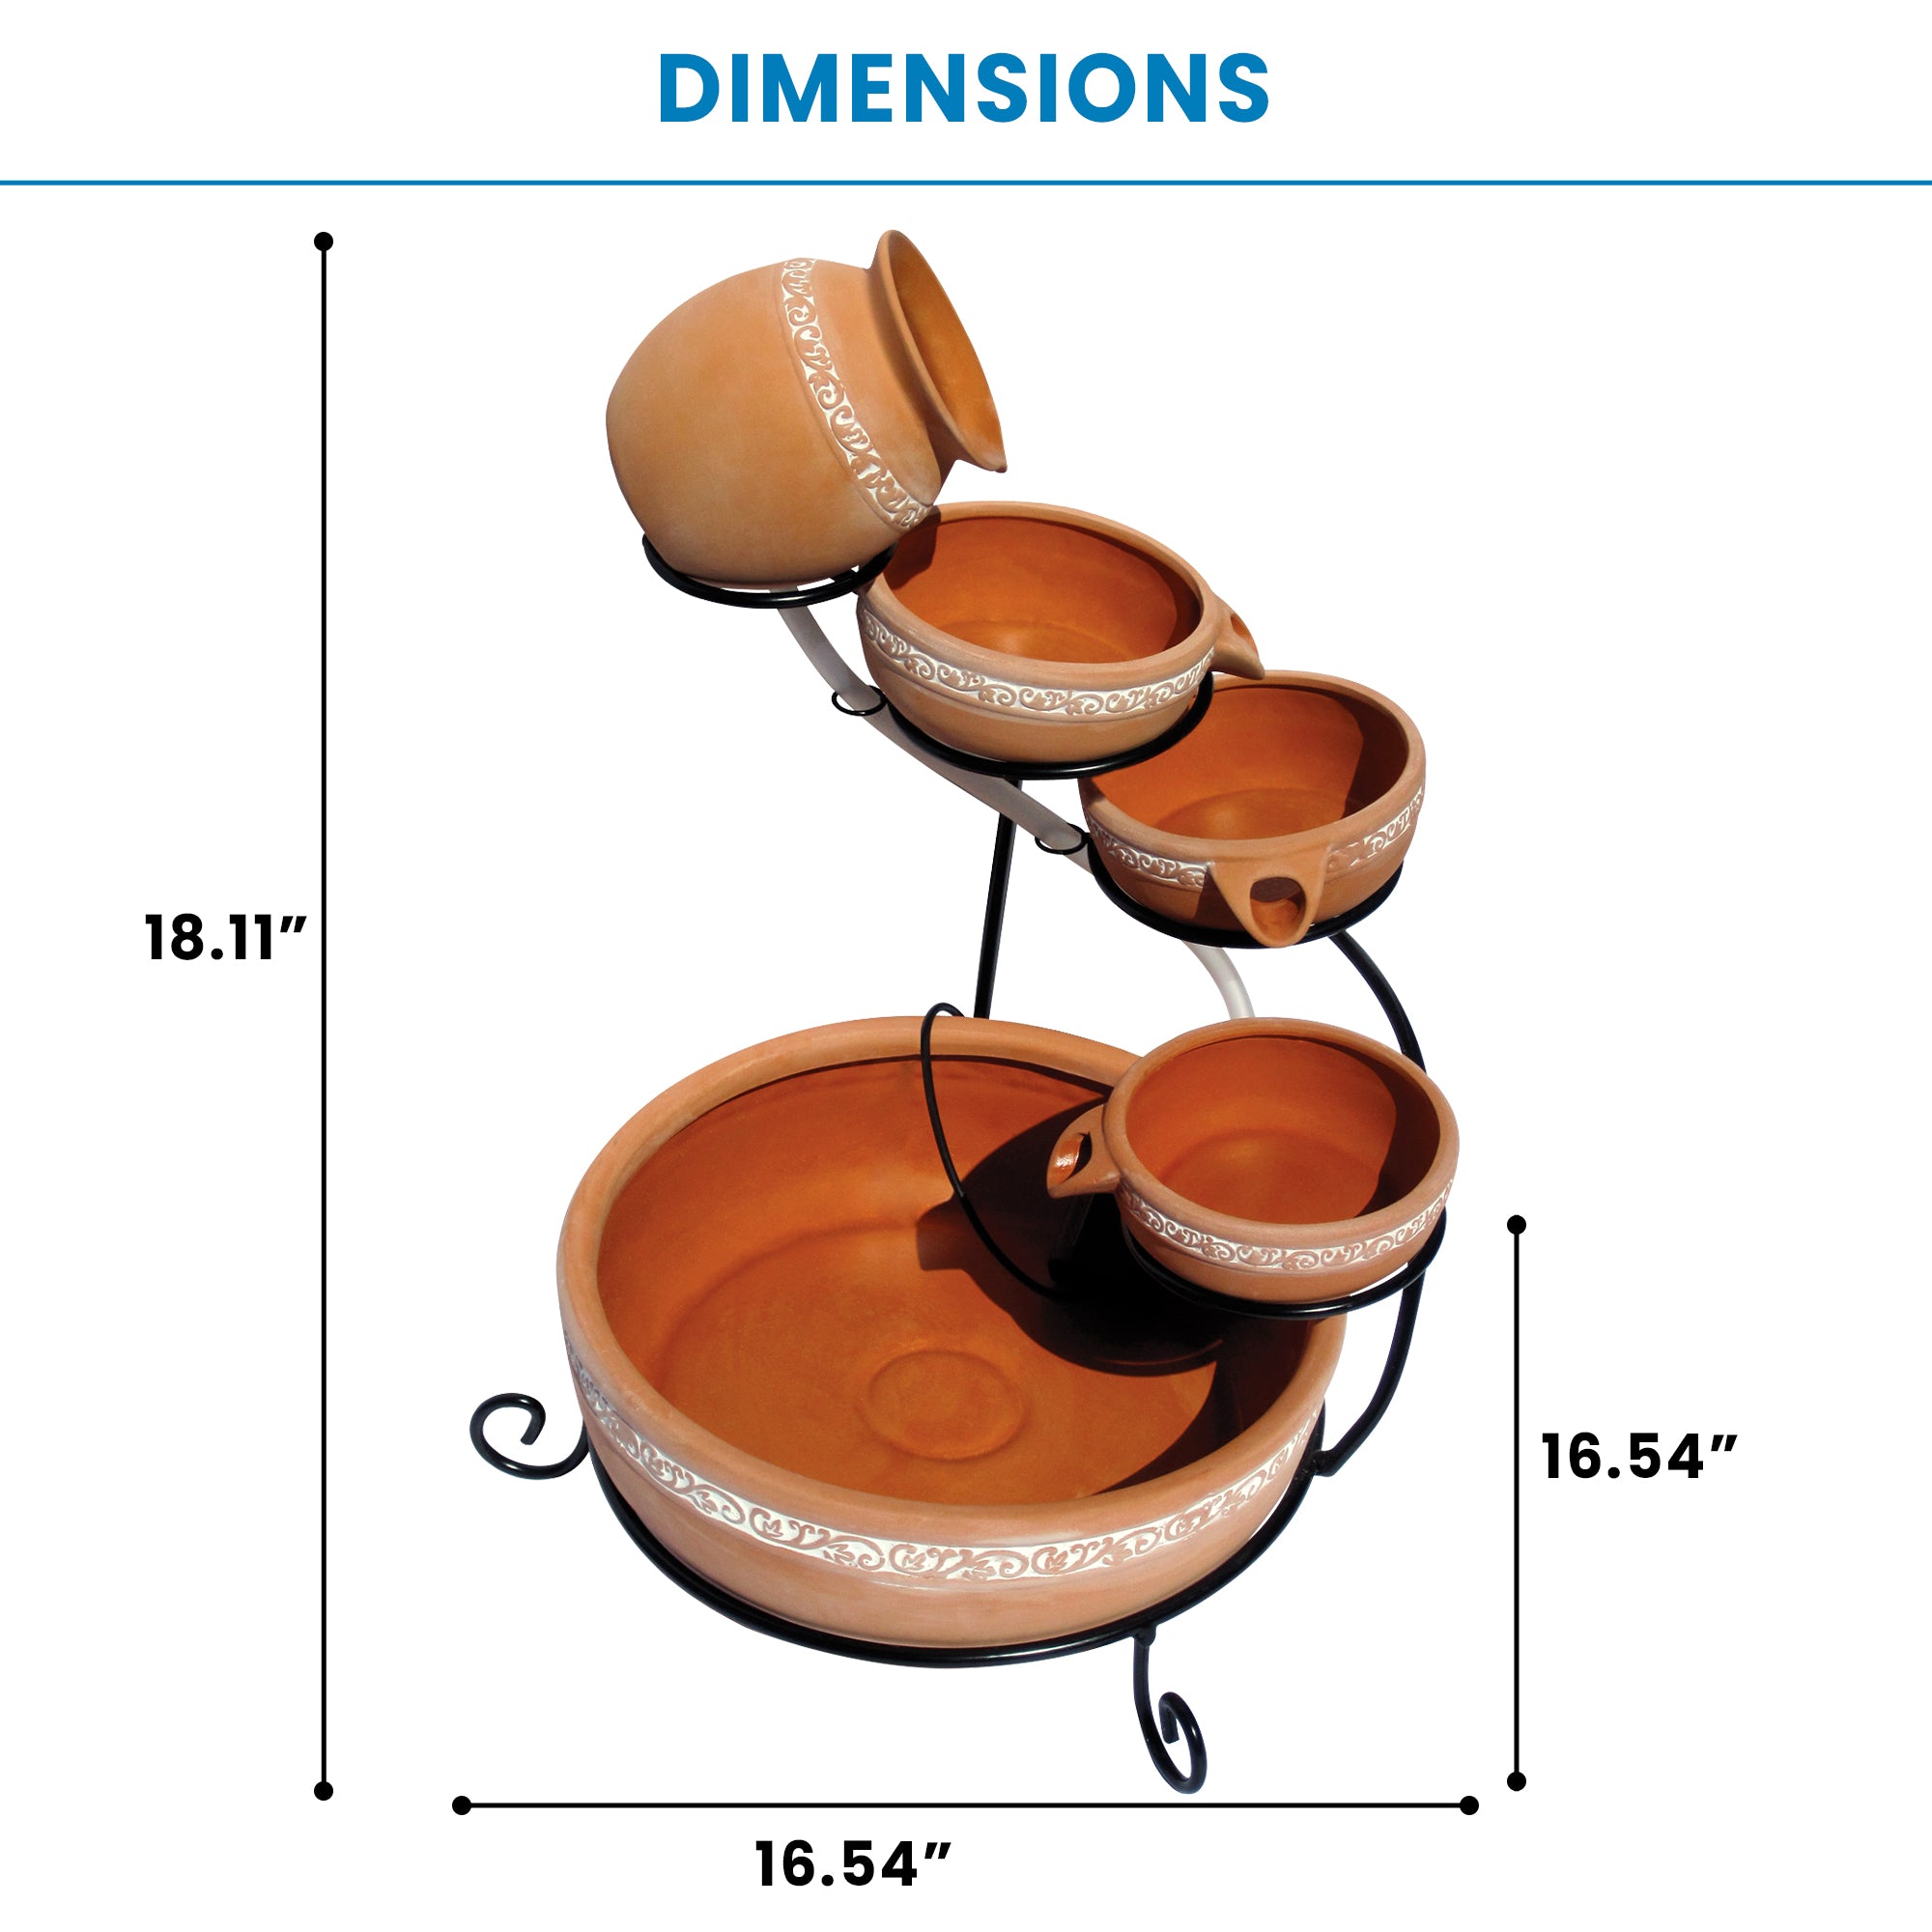 Koolscapes cascading terracotta solar fountain on a white background with dimensions labeled